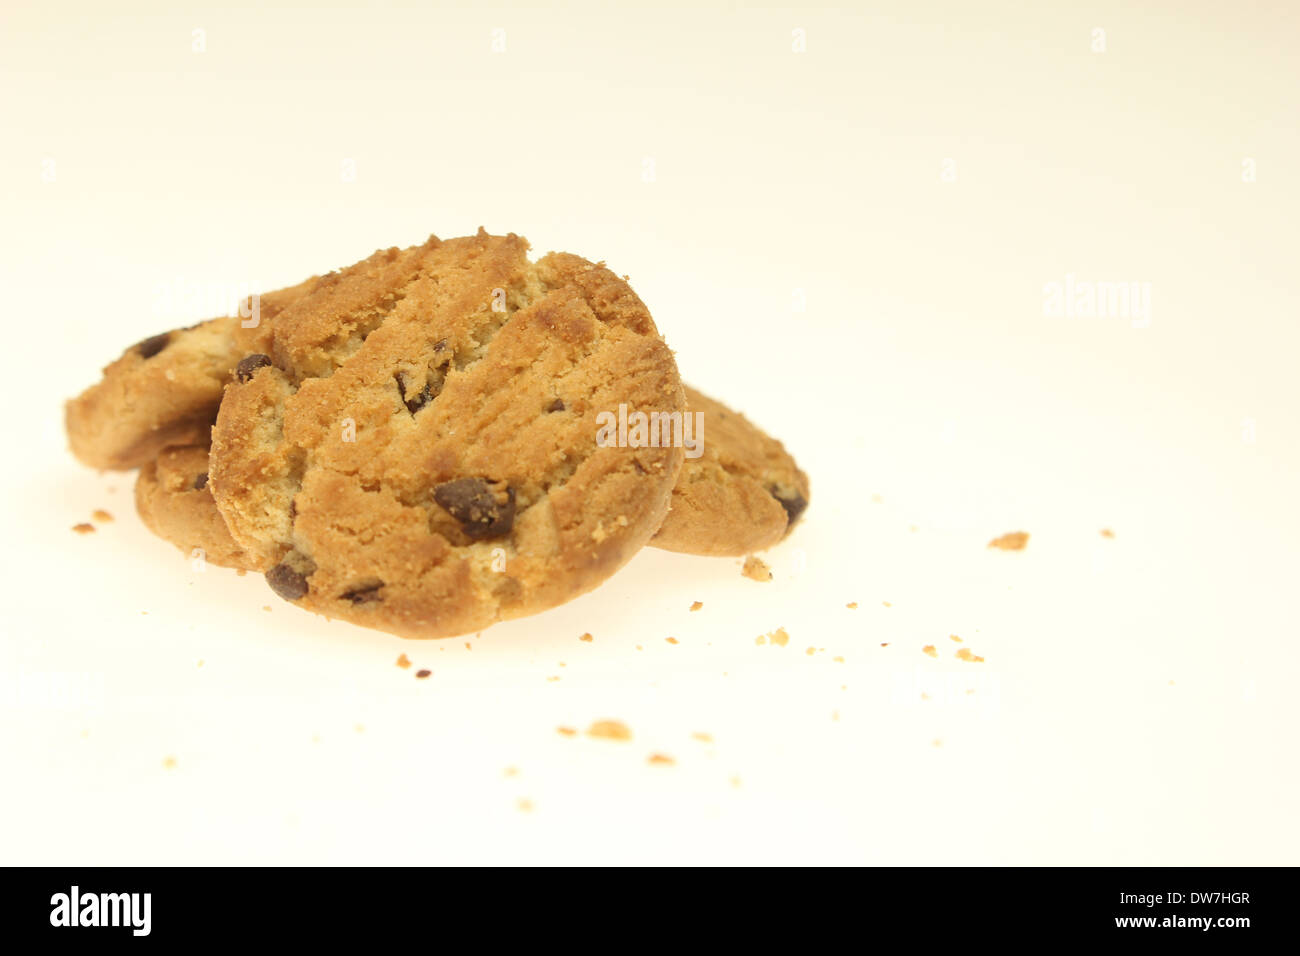 Crumbled Cookie, 02-30-2014 Stock Photo